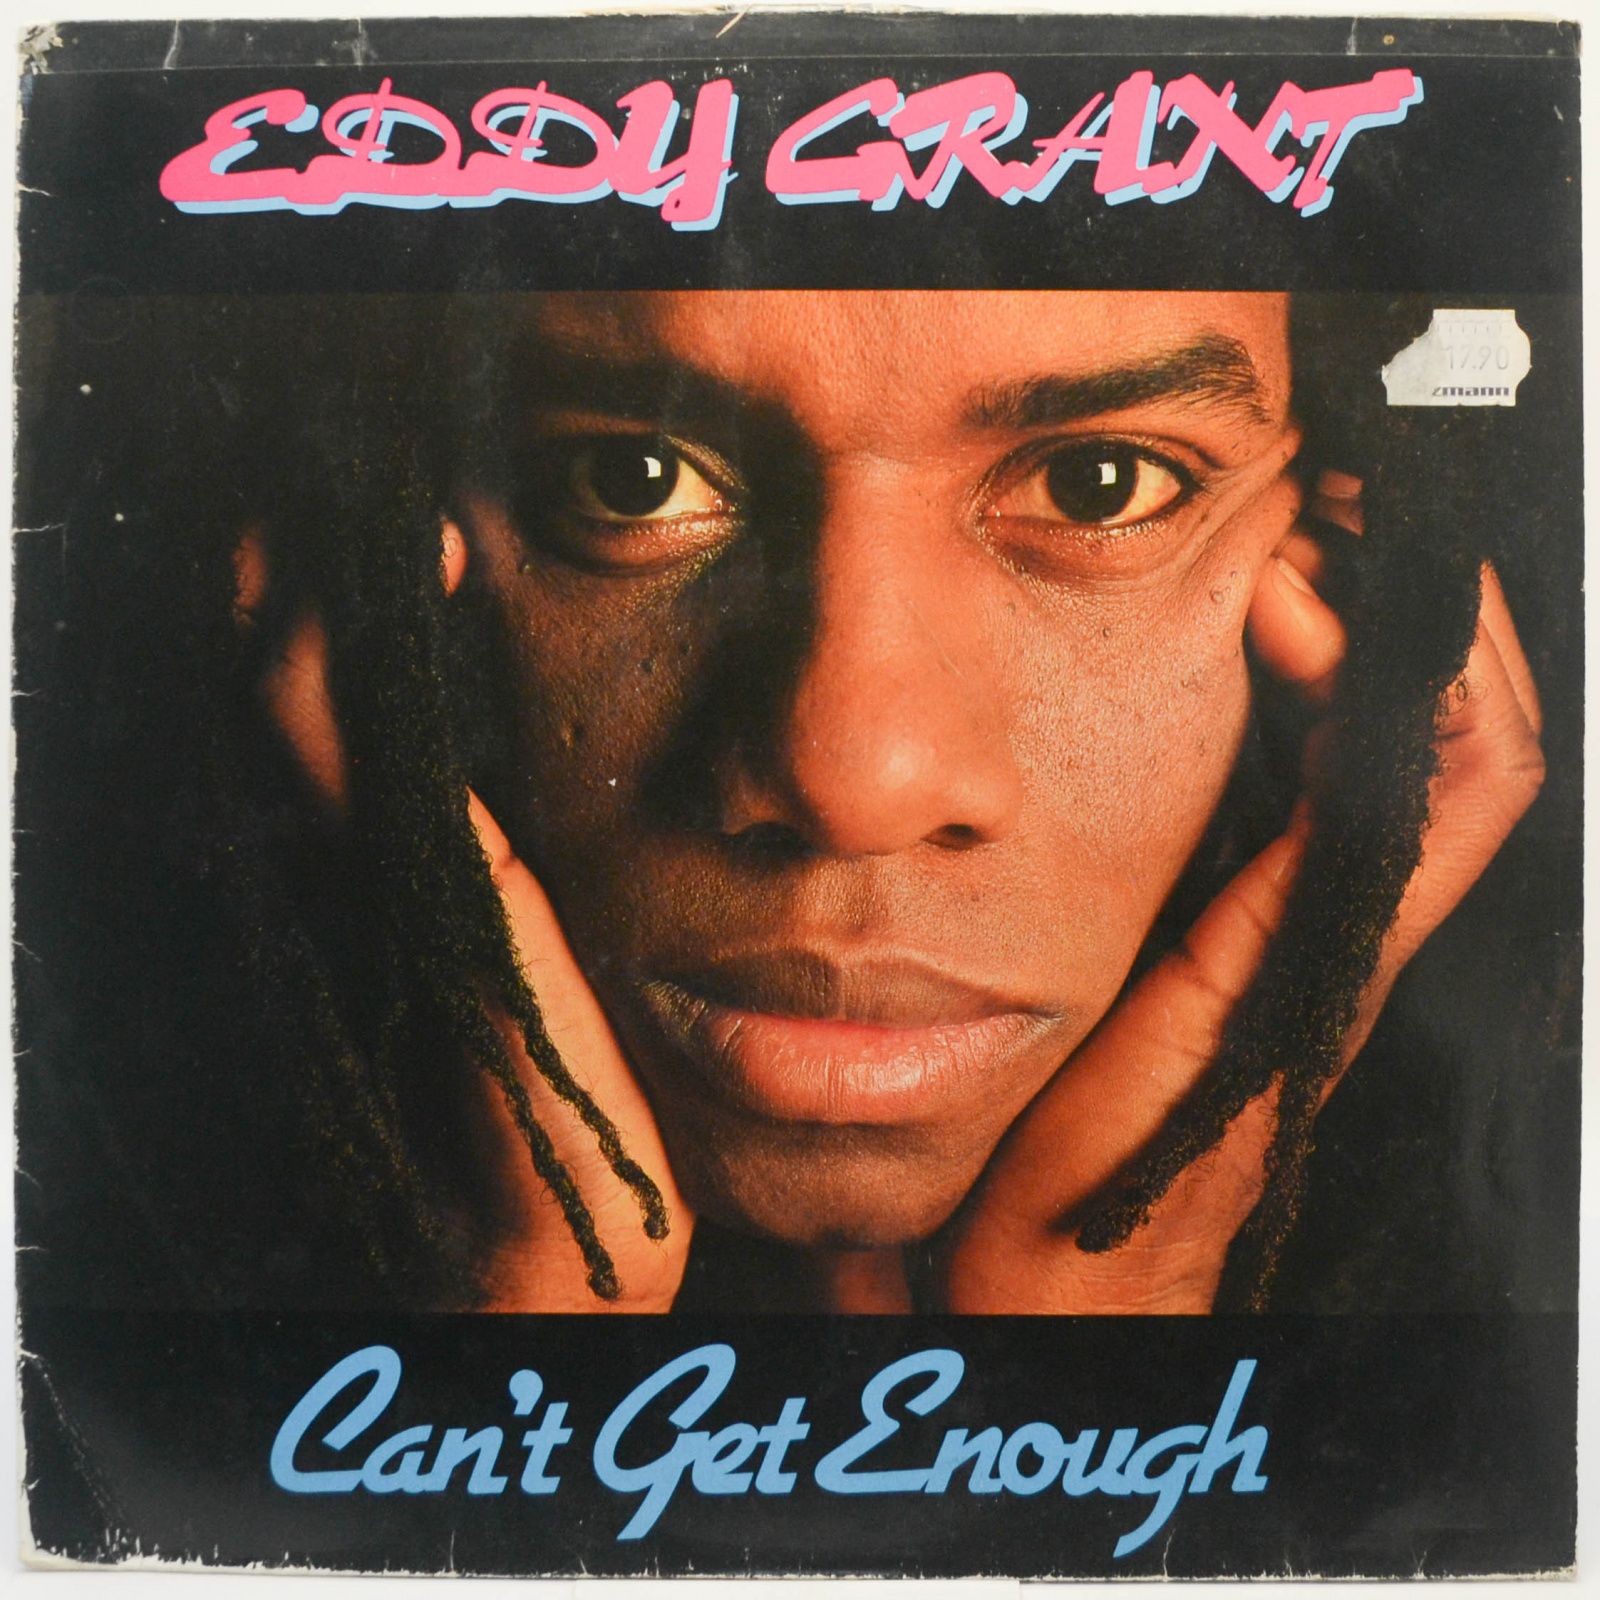 Eddy Grant — Can't Get Enough, 1981